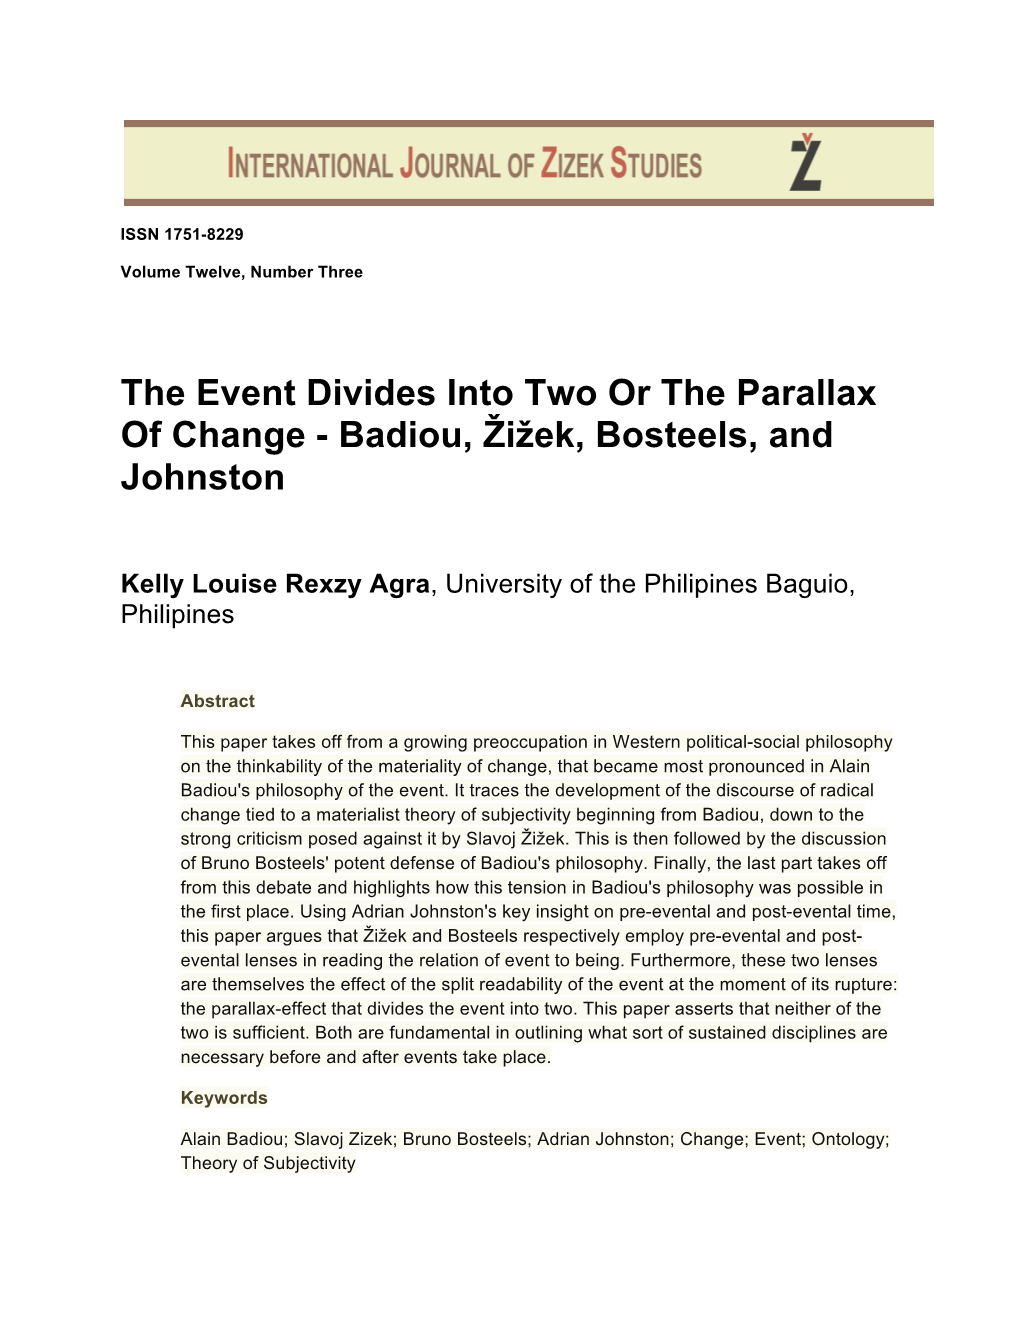 The Event Divides Into Two Or the Parallax of Change - Badiou, Žižek, Bosteels, and Johnston